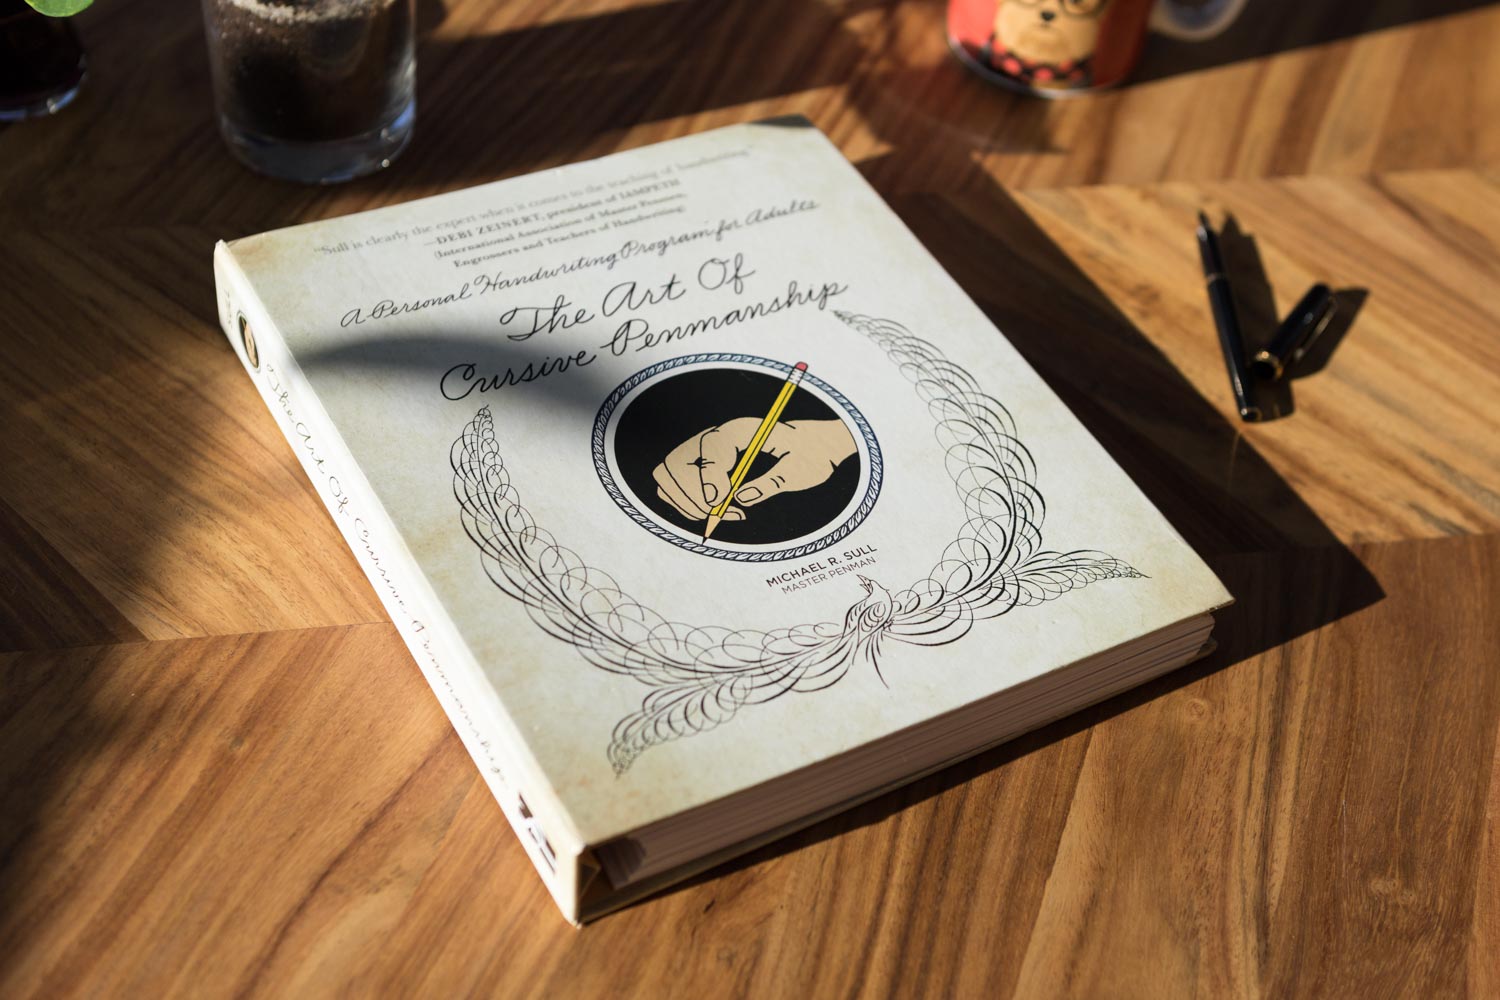 The Art of Cursive Penmanship: A Personal Handwriting Program for Adults [Book]